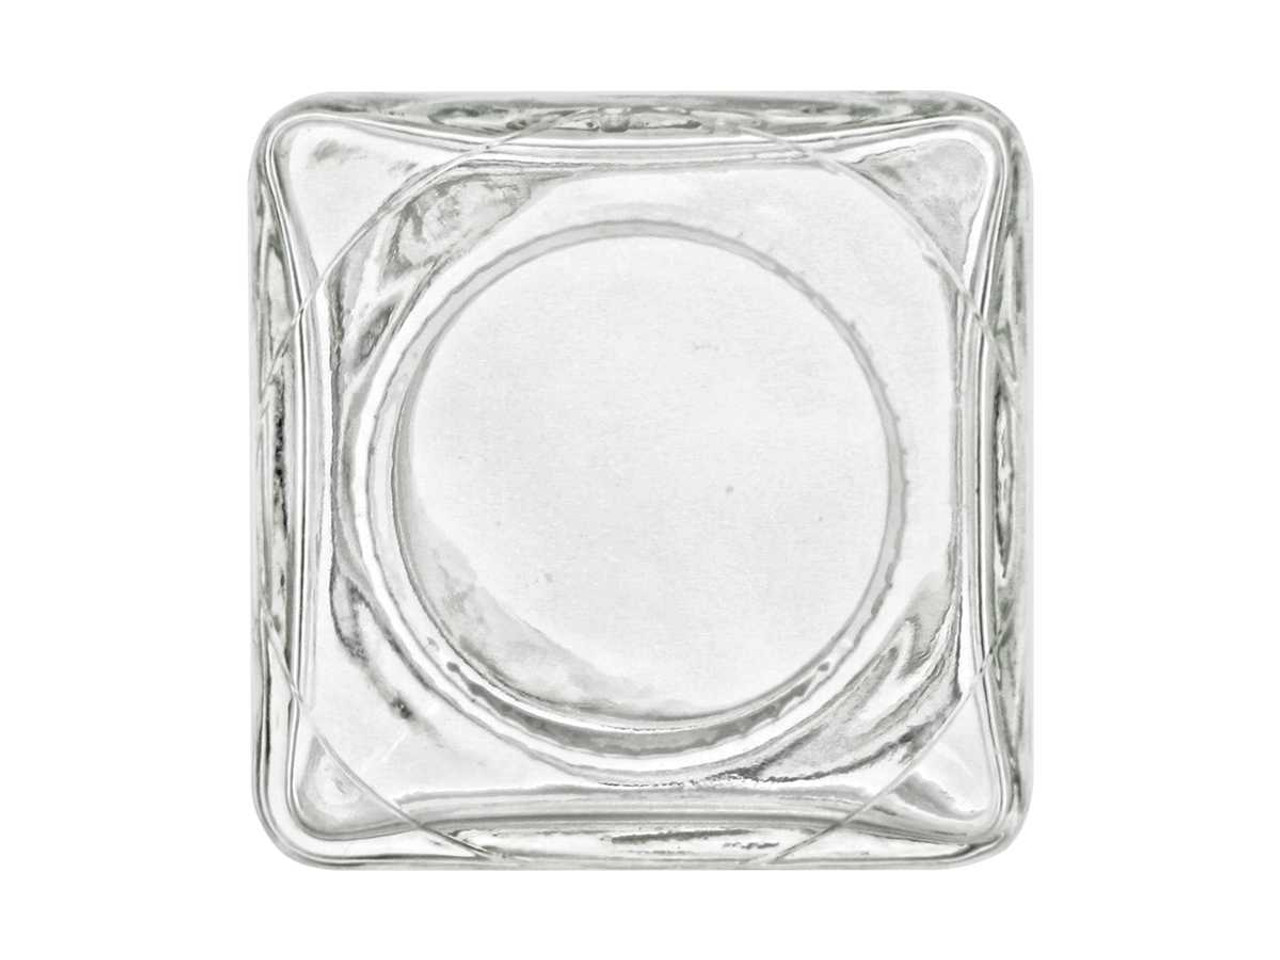 https://cdn11.bigcommerce.com/s-1ybtx/images/stencil/1280x1280/products/1269/6683/4-oz-Cube-Square-Glass-Jars-with-Lid-Made-in-Europe_4214__11991.1674335838.jpg?c=2?imbypass=on